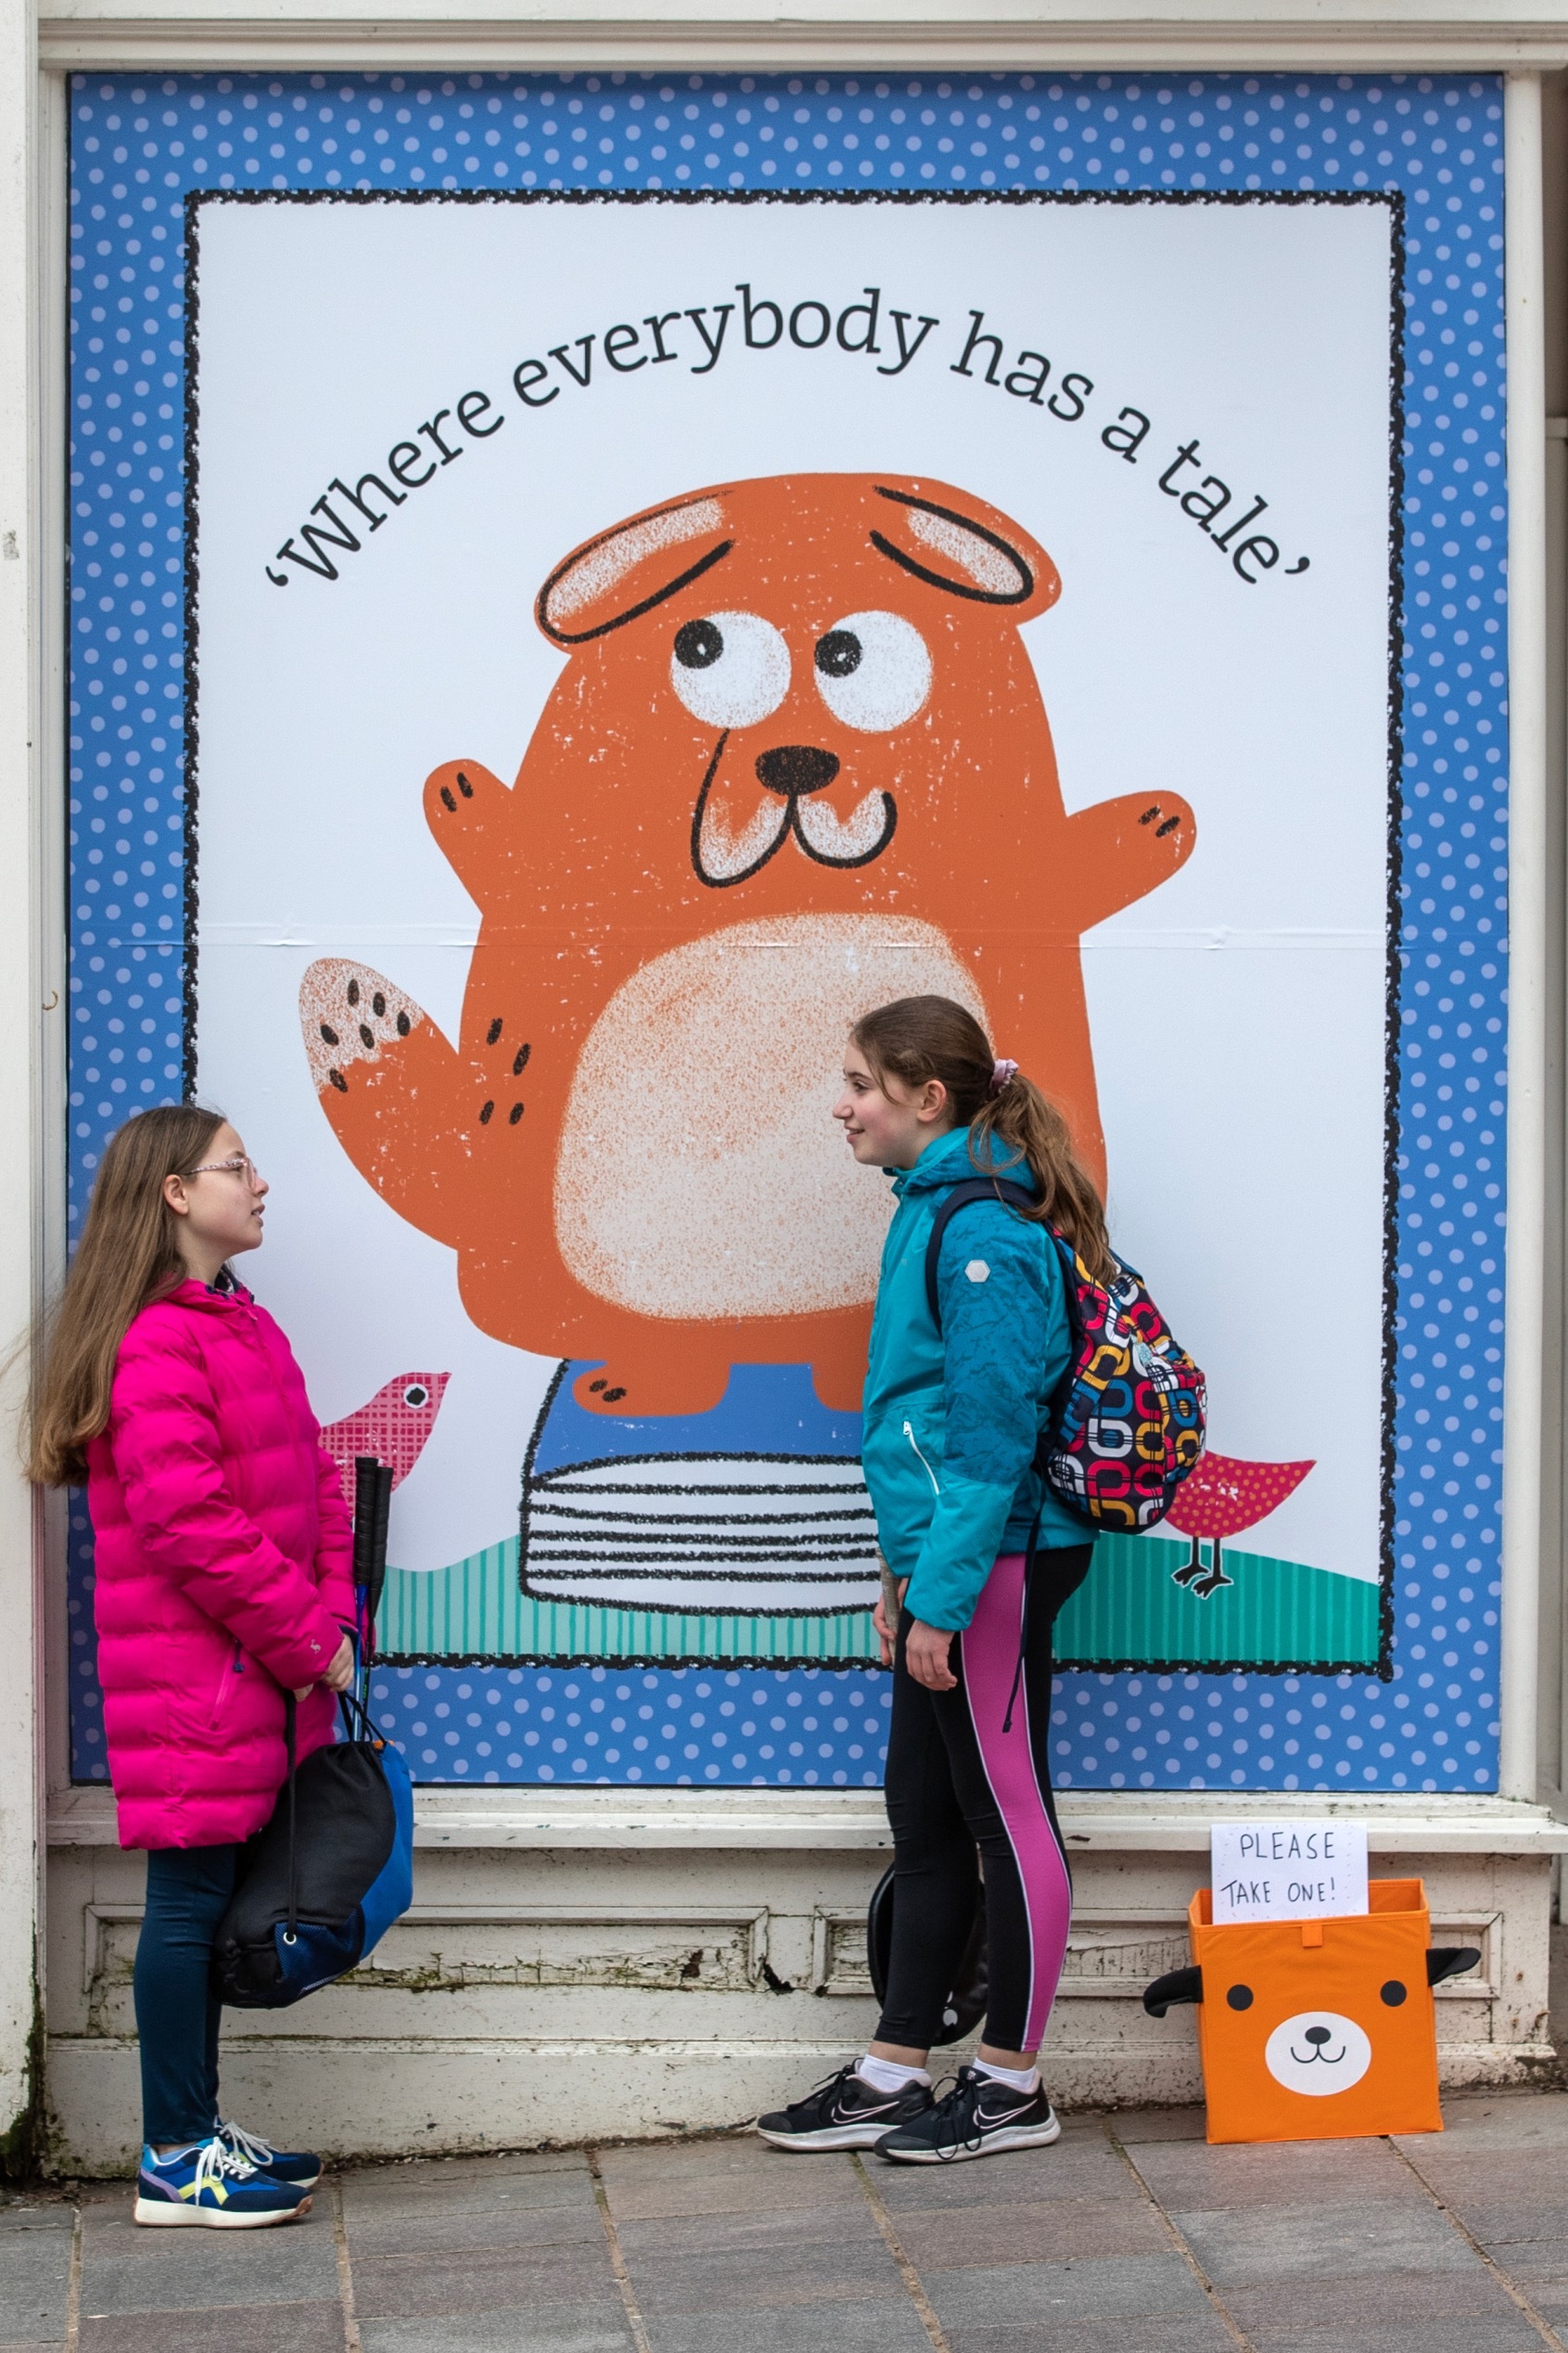 Two children stand talking outside Big DoG HQ in front of a large window decoupage featuring the character Big DoG, an orange dog, with the caption 'Where everybody has a tale' above.